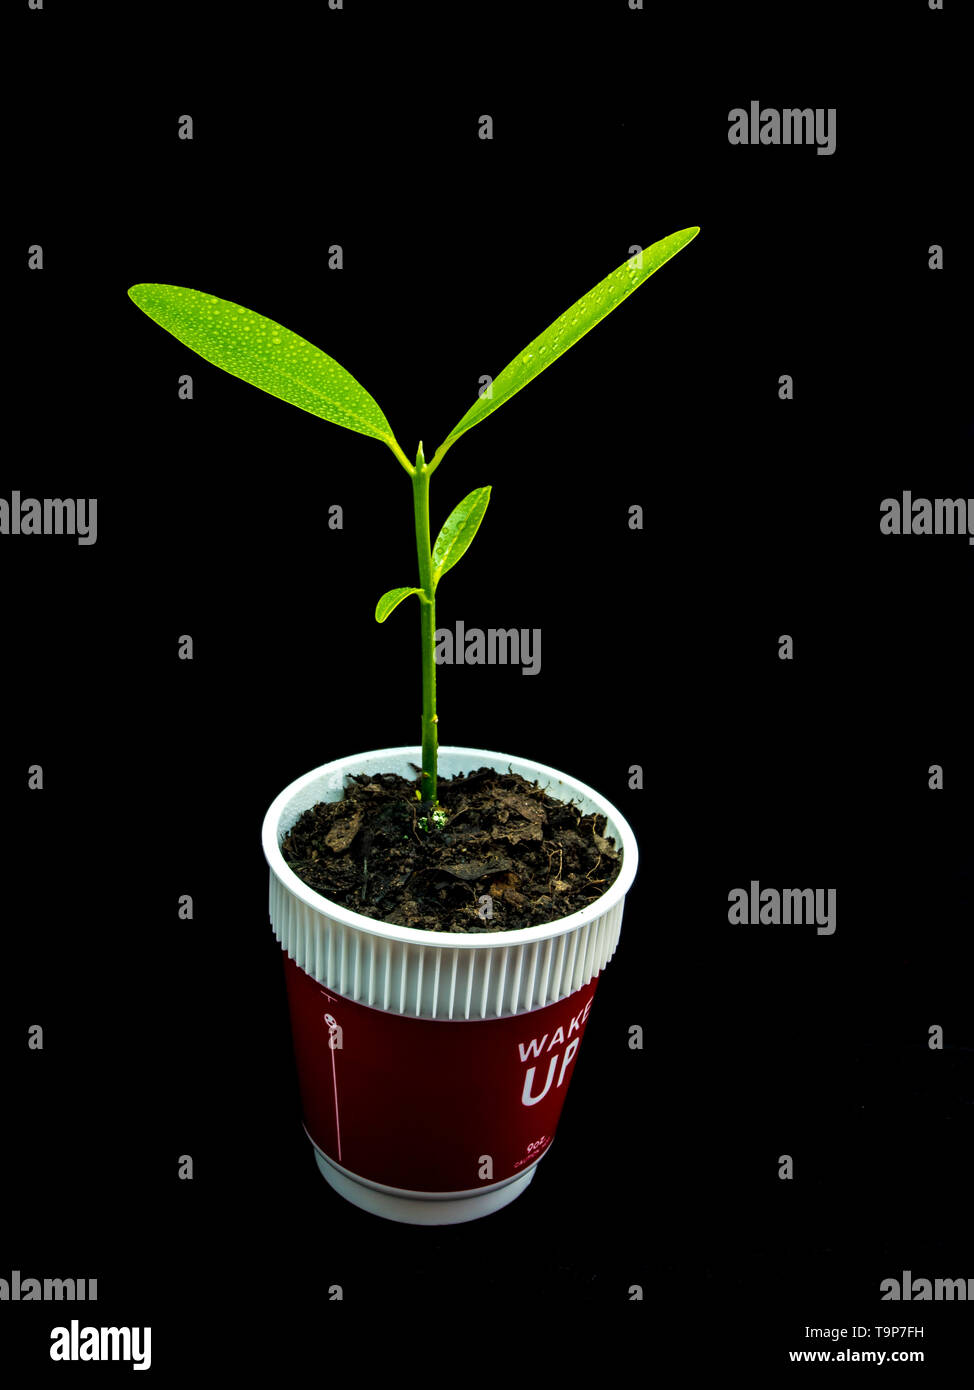 Bud leaves of young plant seeding in plastic cup Stock Photo